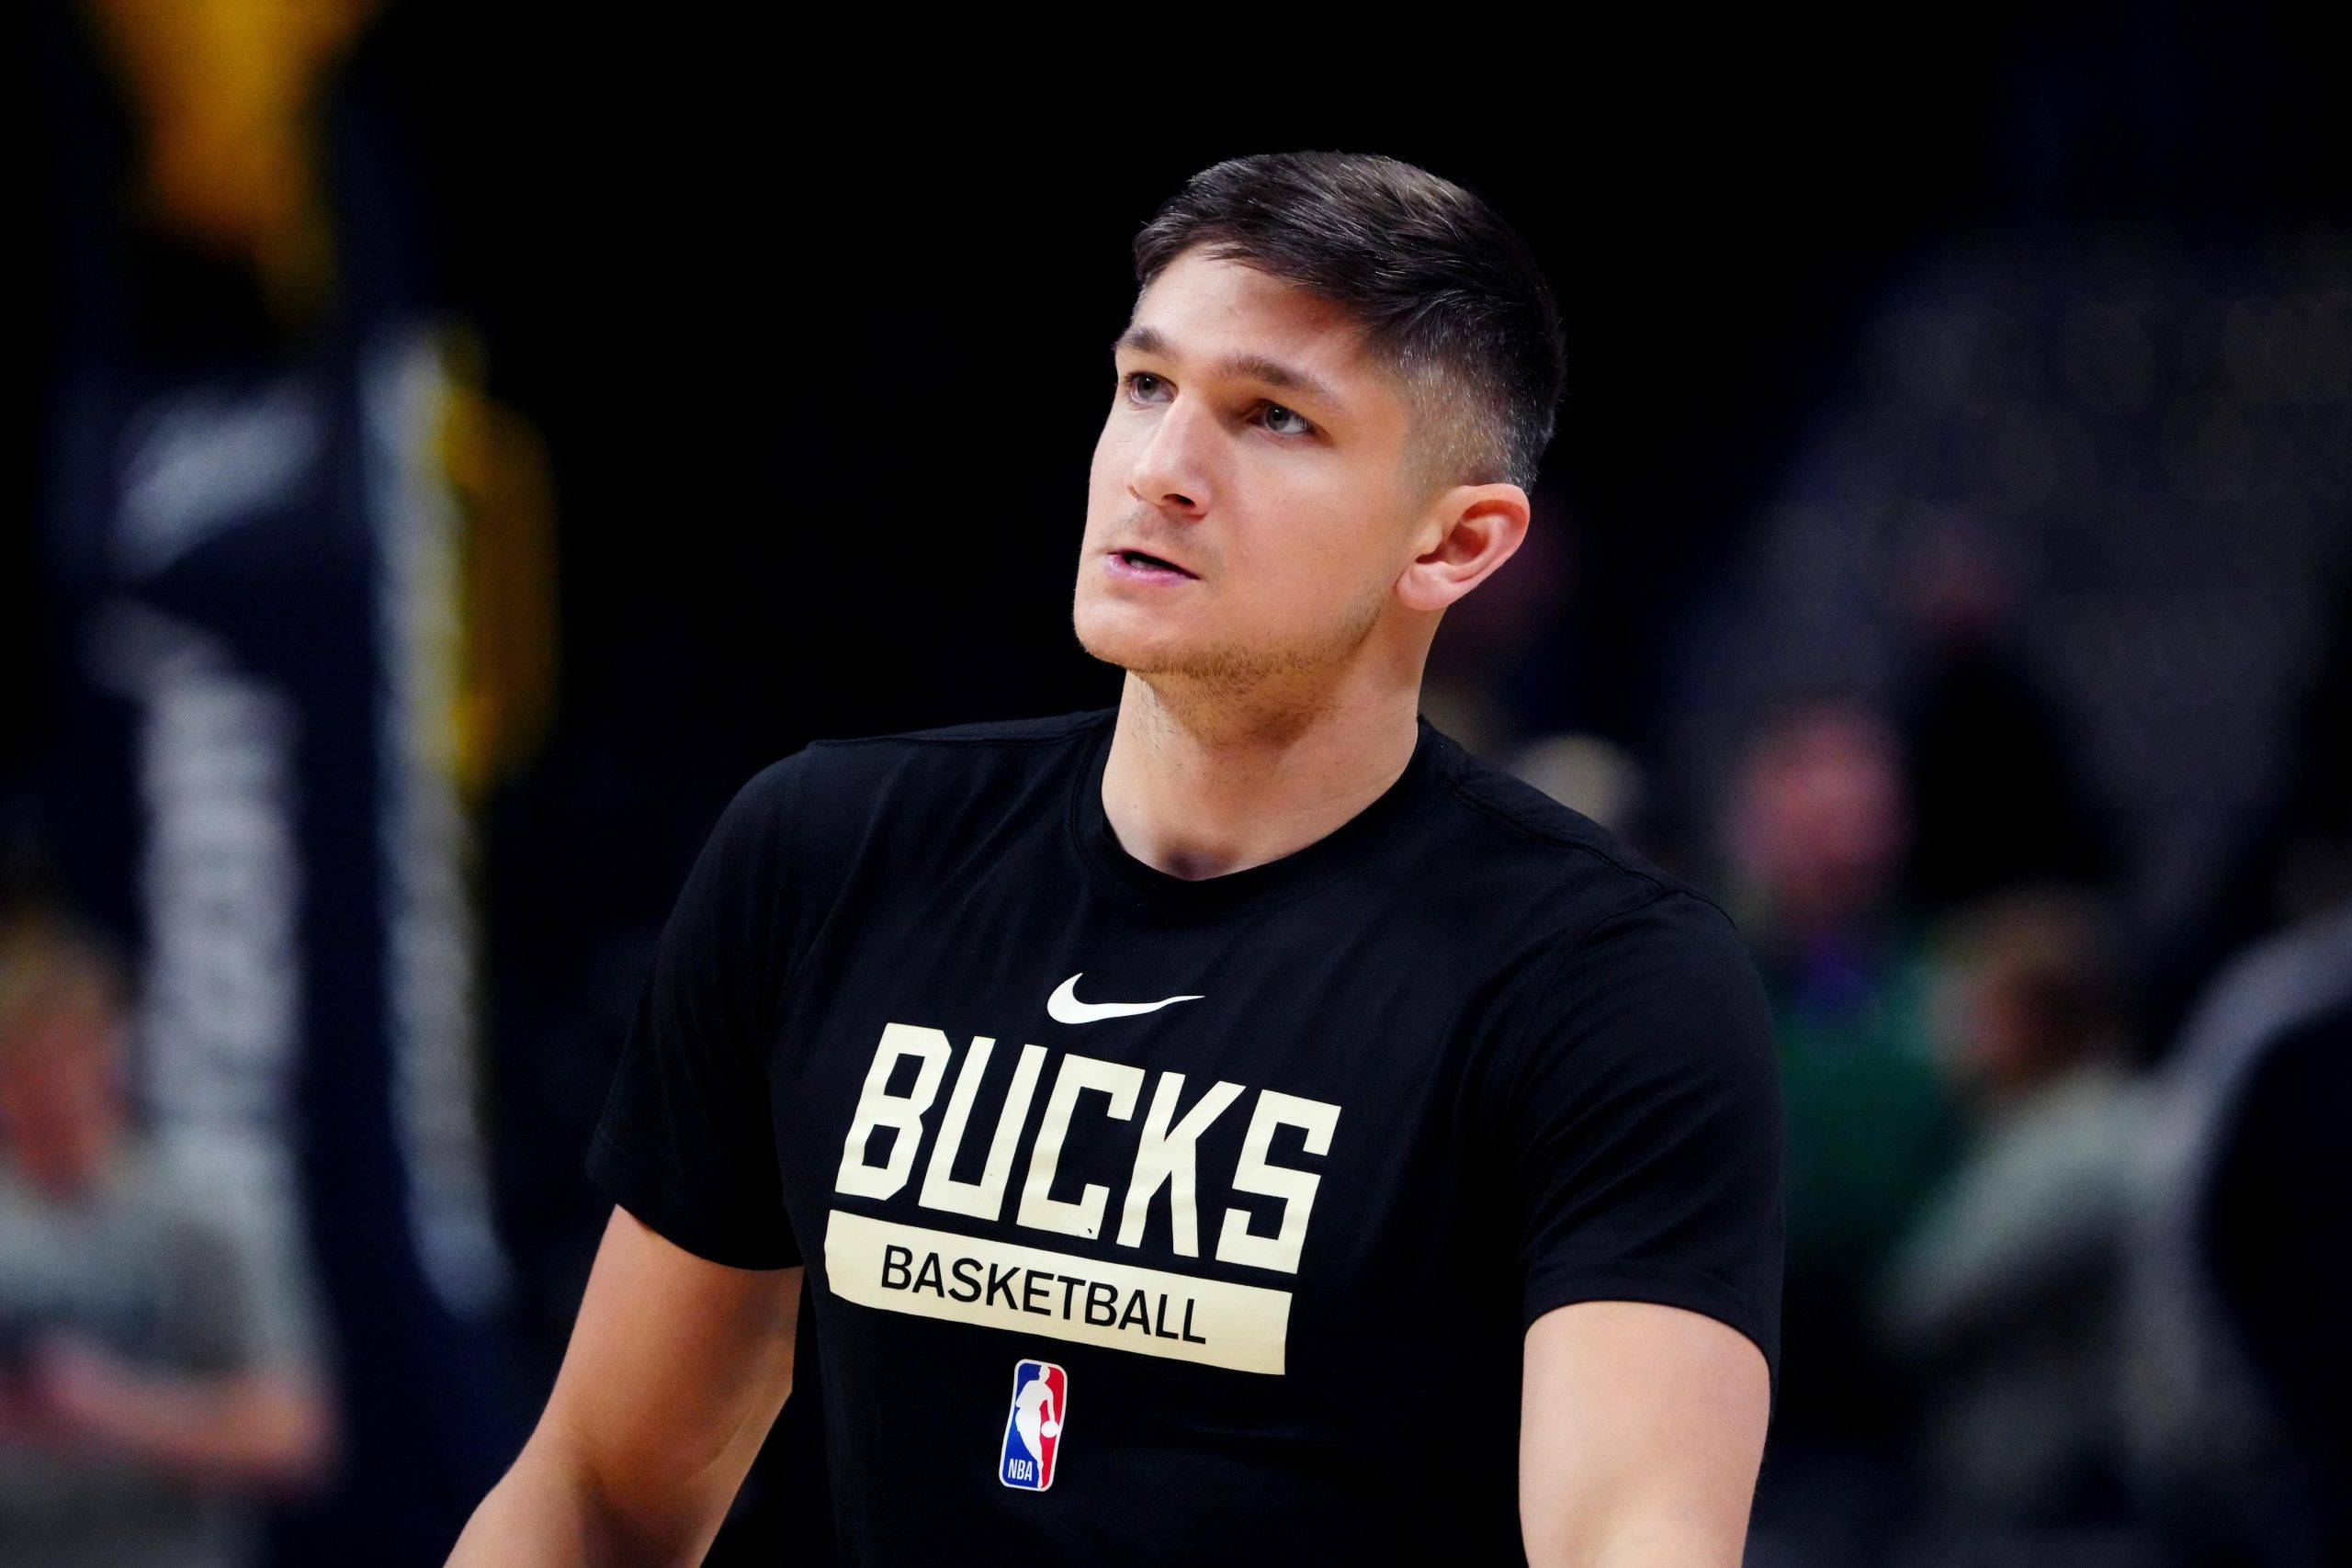 Mar 25, 2023; Denver, Colorado, USA; Milwaukee Bucks guard Grayson Allen (12) before the game against the Denver Nuggets at Ball Arena. Mandatory Credit: Ron Chenoy-USA TODAY Sports